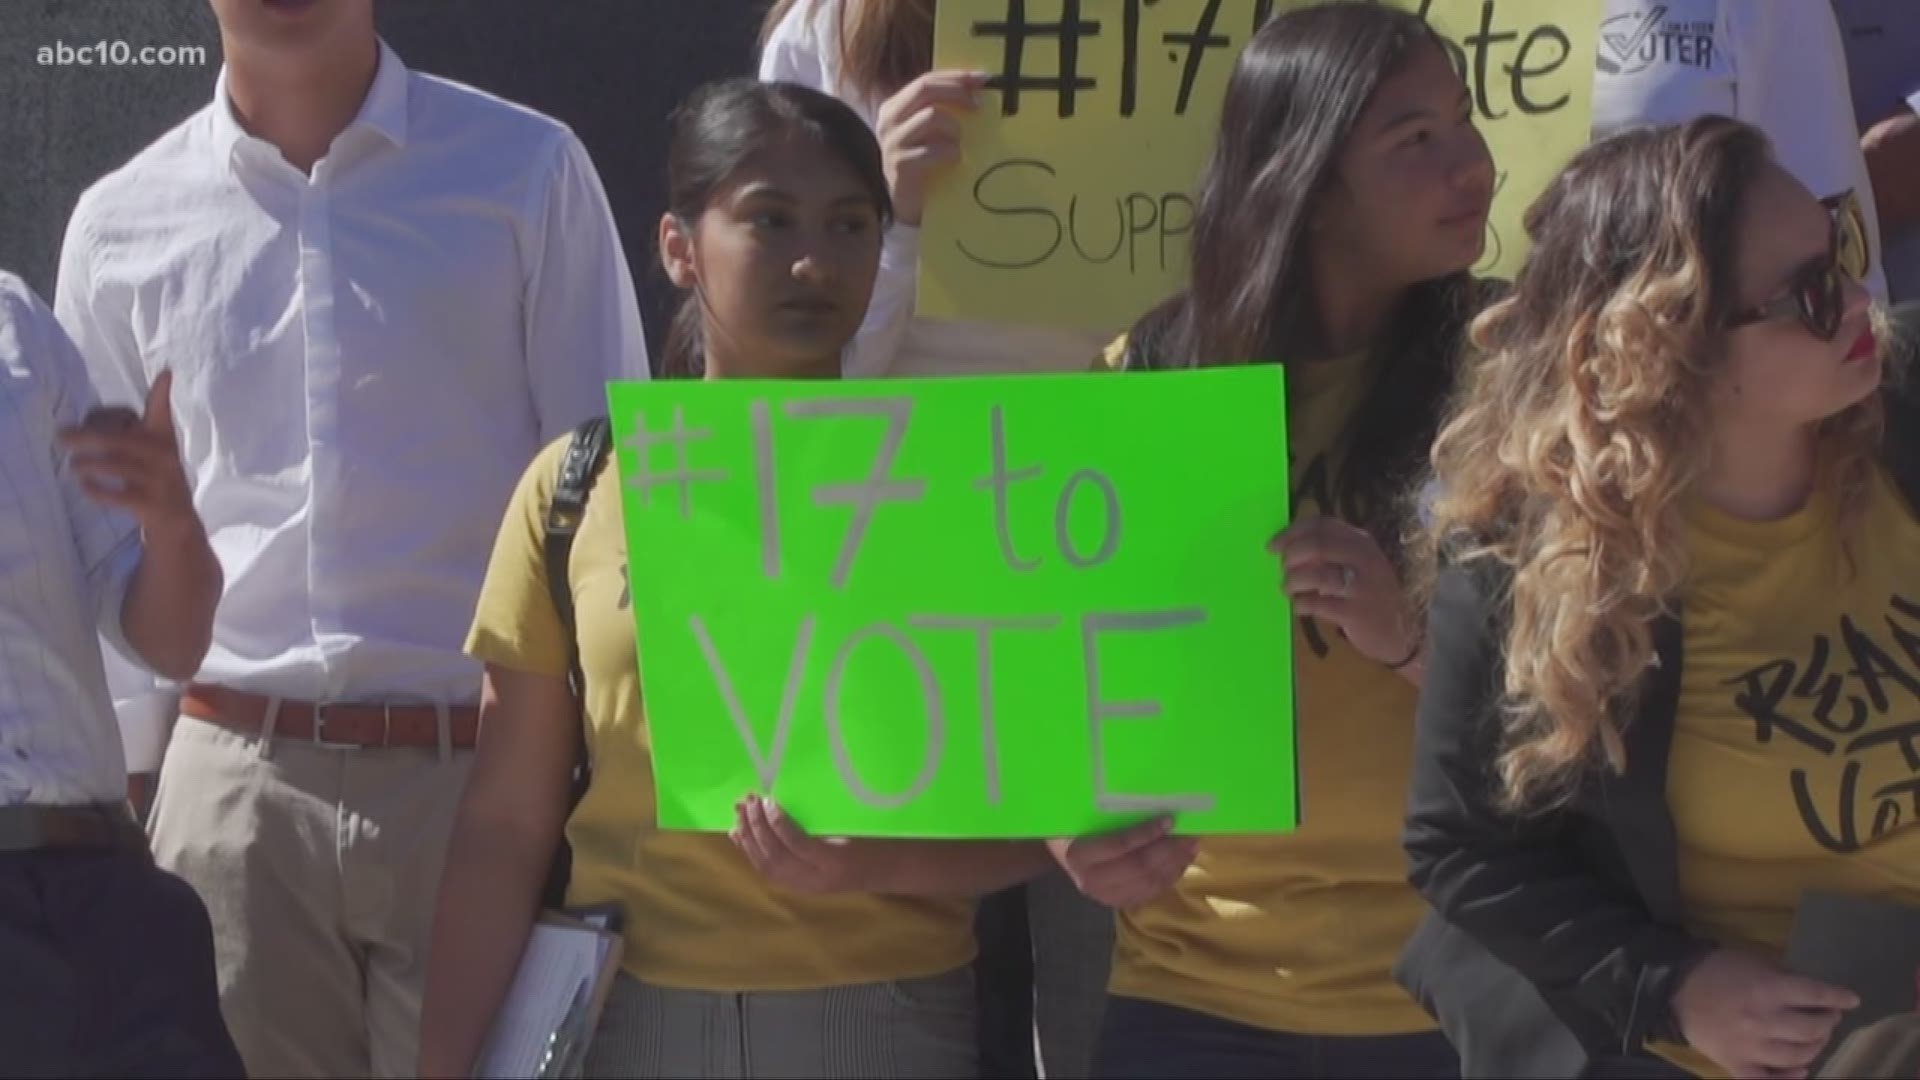 Dozens of teenagers and lawmakers rallied at the Capitol to lower the voting age in California to 17. That measure is now one step closer to becoming a reality after passing through the state assembly.